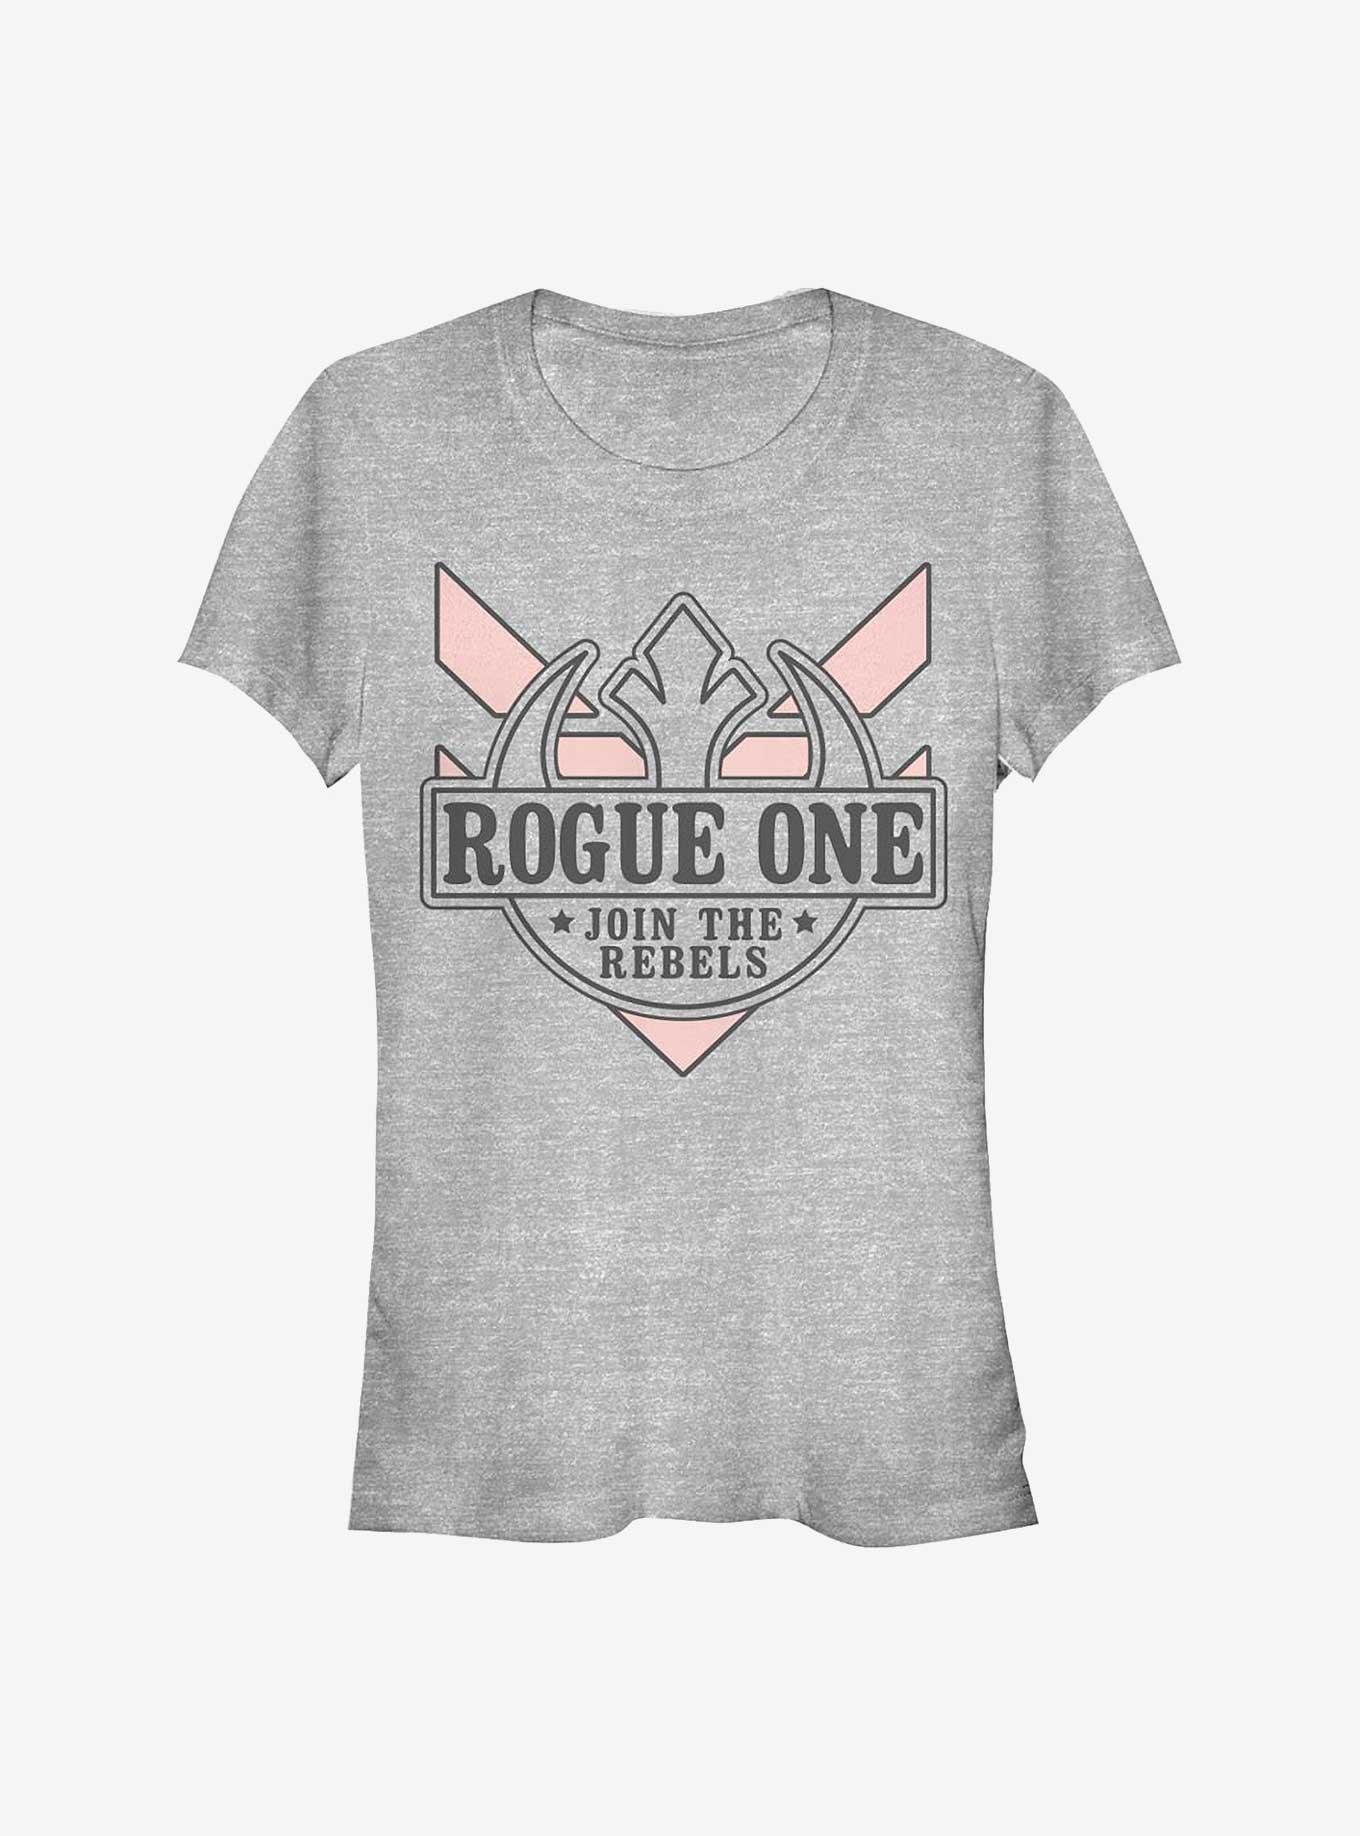 Star Wars Rogue One: A Story Join The Rebels Girls T-Shirt